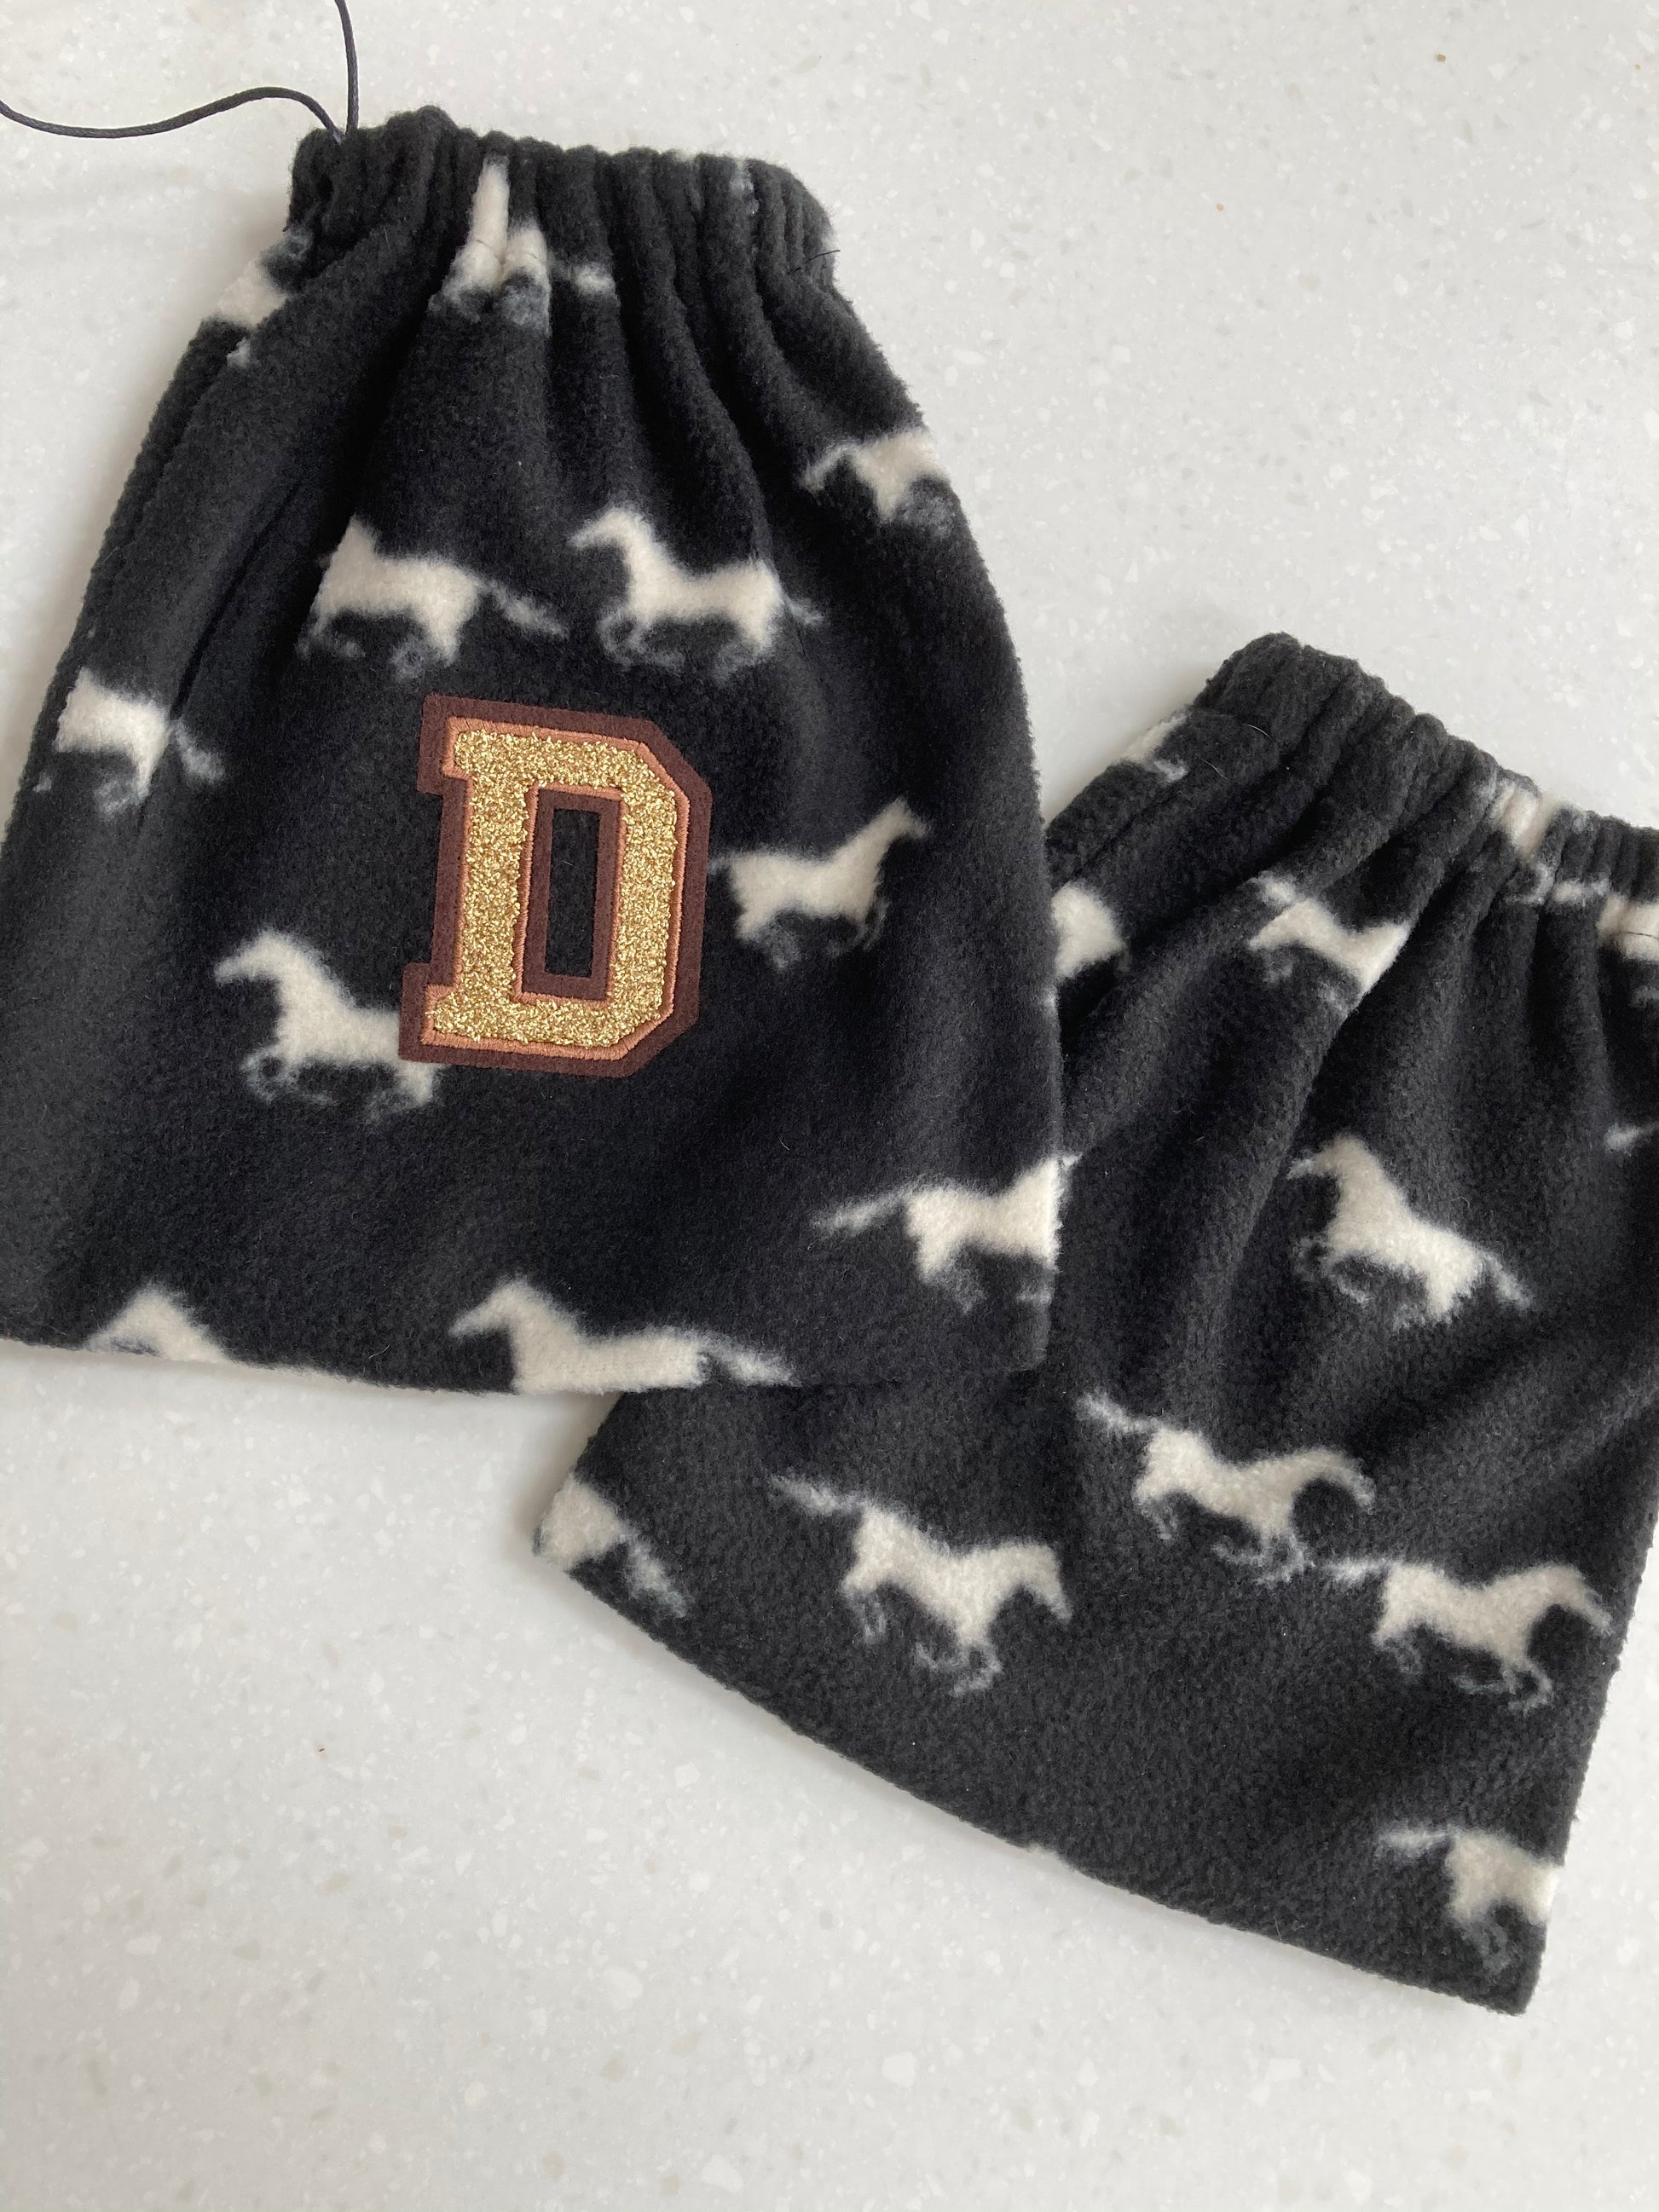 black stirrup covers with white horses on them and a gold 'd' embroidered patch on one of them